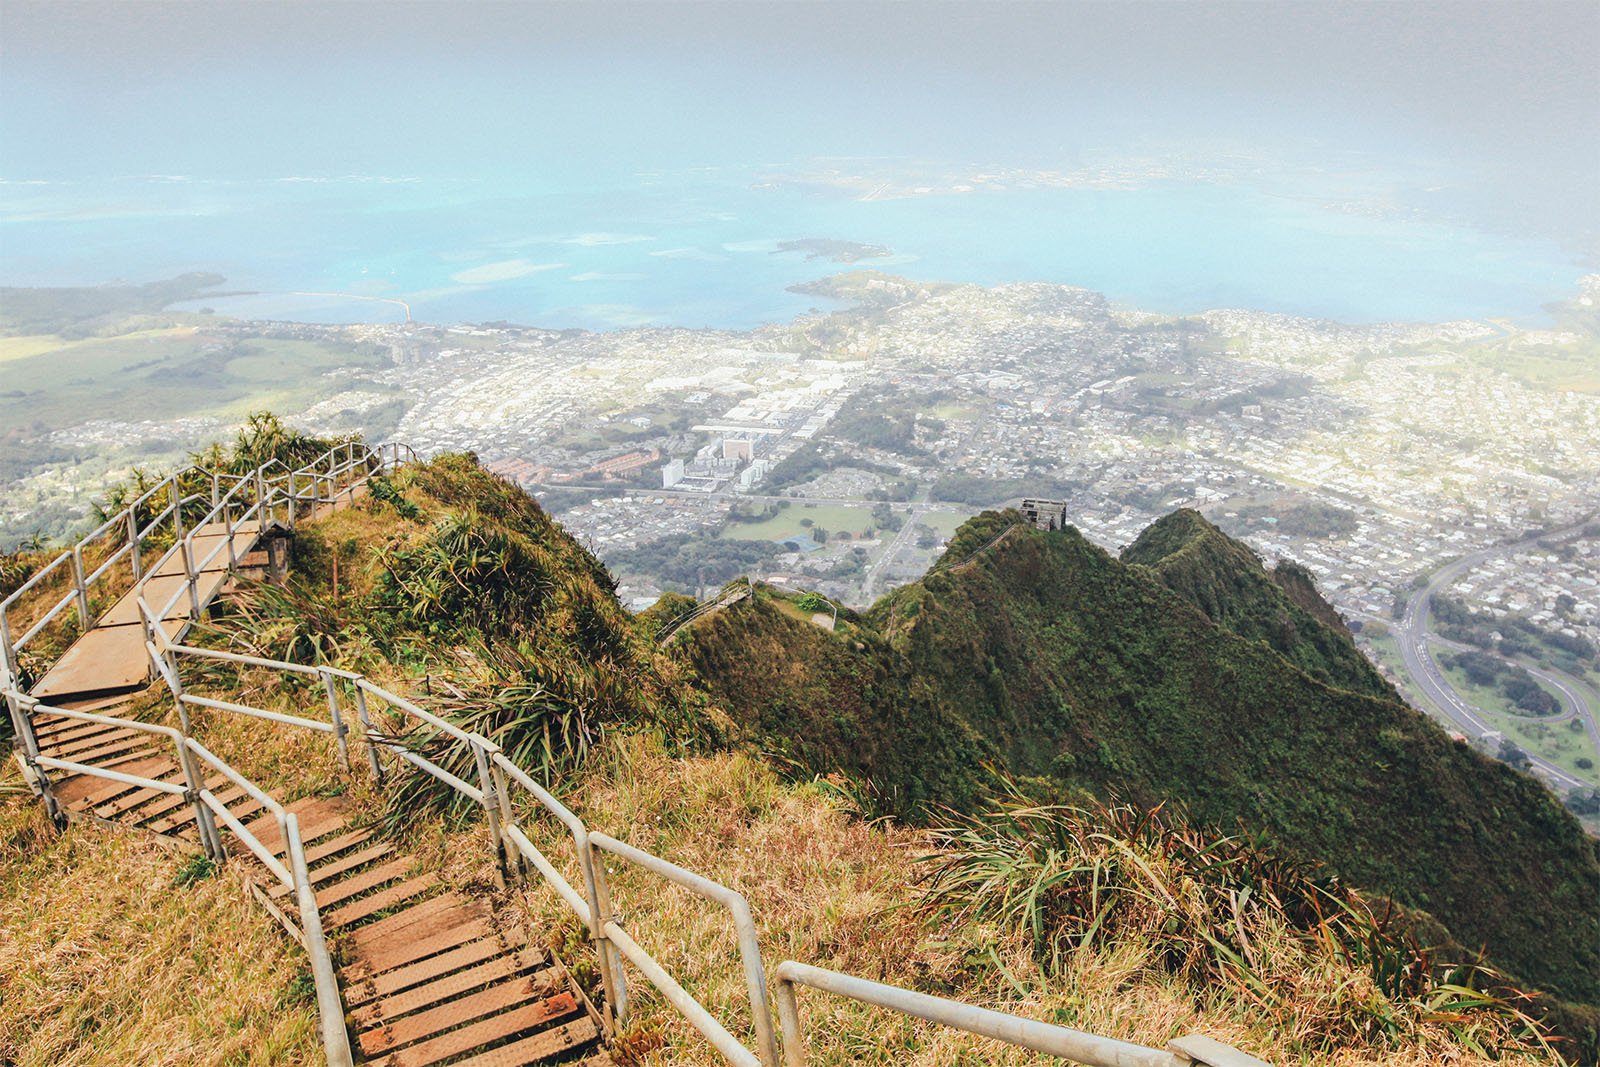 Aerial view from a mountainous hiking trail with a wooden staircase leading down towards a lush valley, overlooking a coastal town and bright blue sea in the distance.